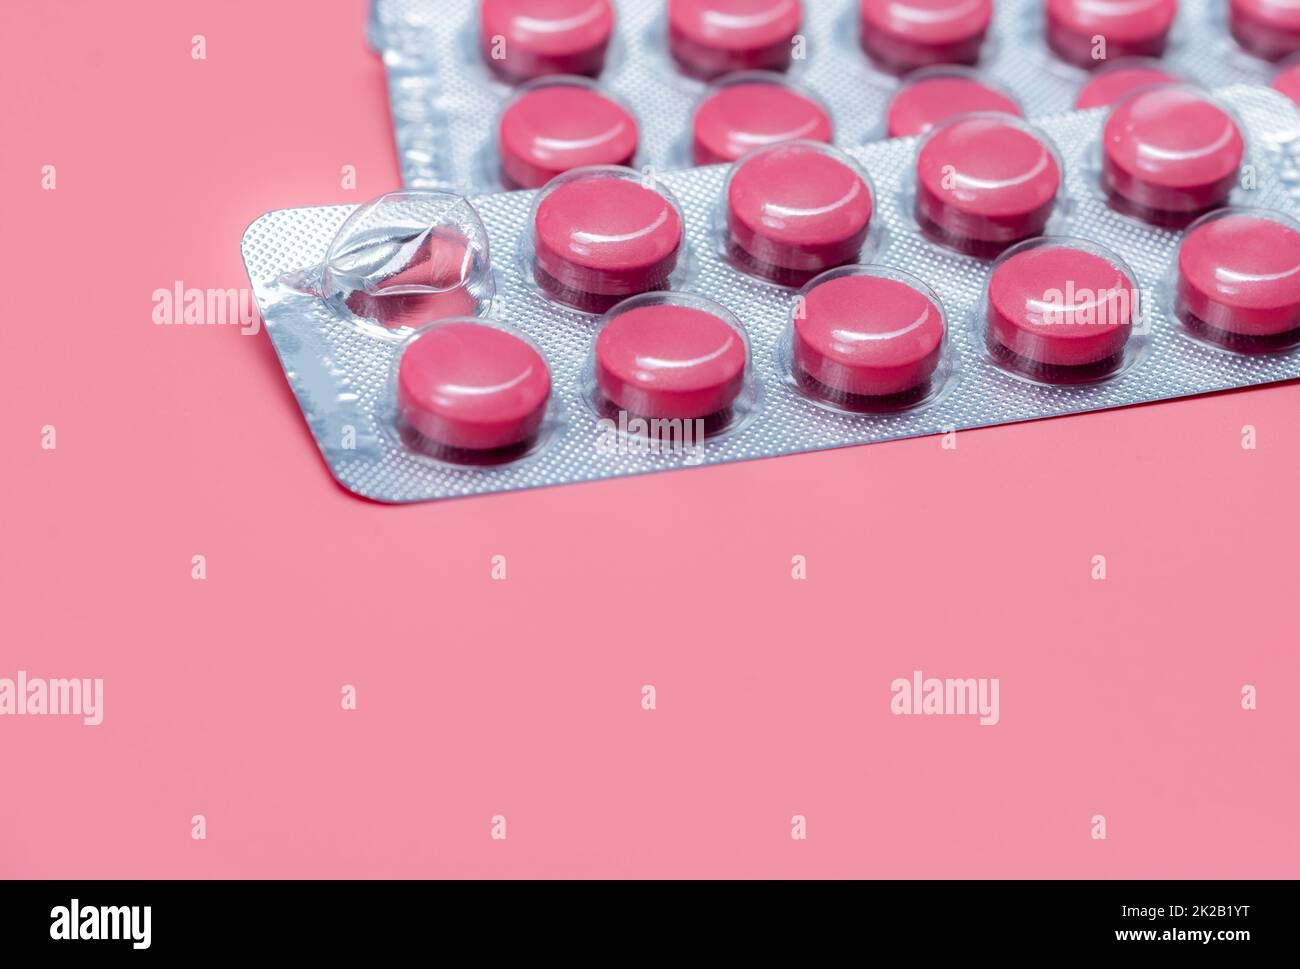 Take pill concept. Pink tablets pills in blister pack on pink background. Prescription drug. Pharmaceutical industry. Pill reminder or medication reminder background. Vitamin, mineral, and supplement. Stock Photo